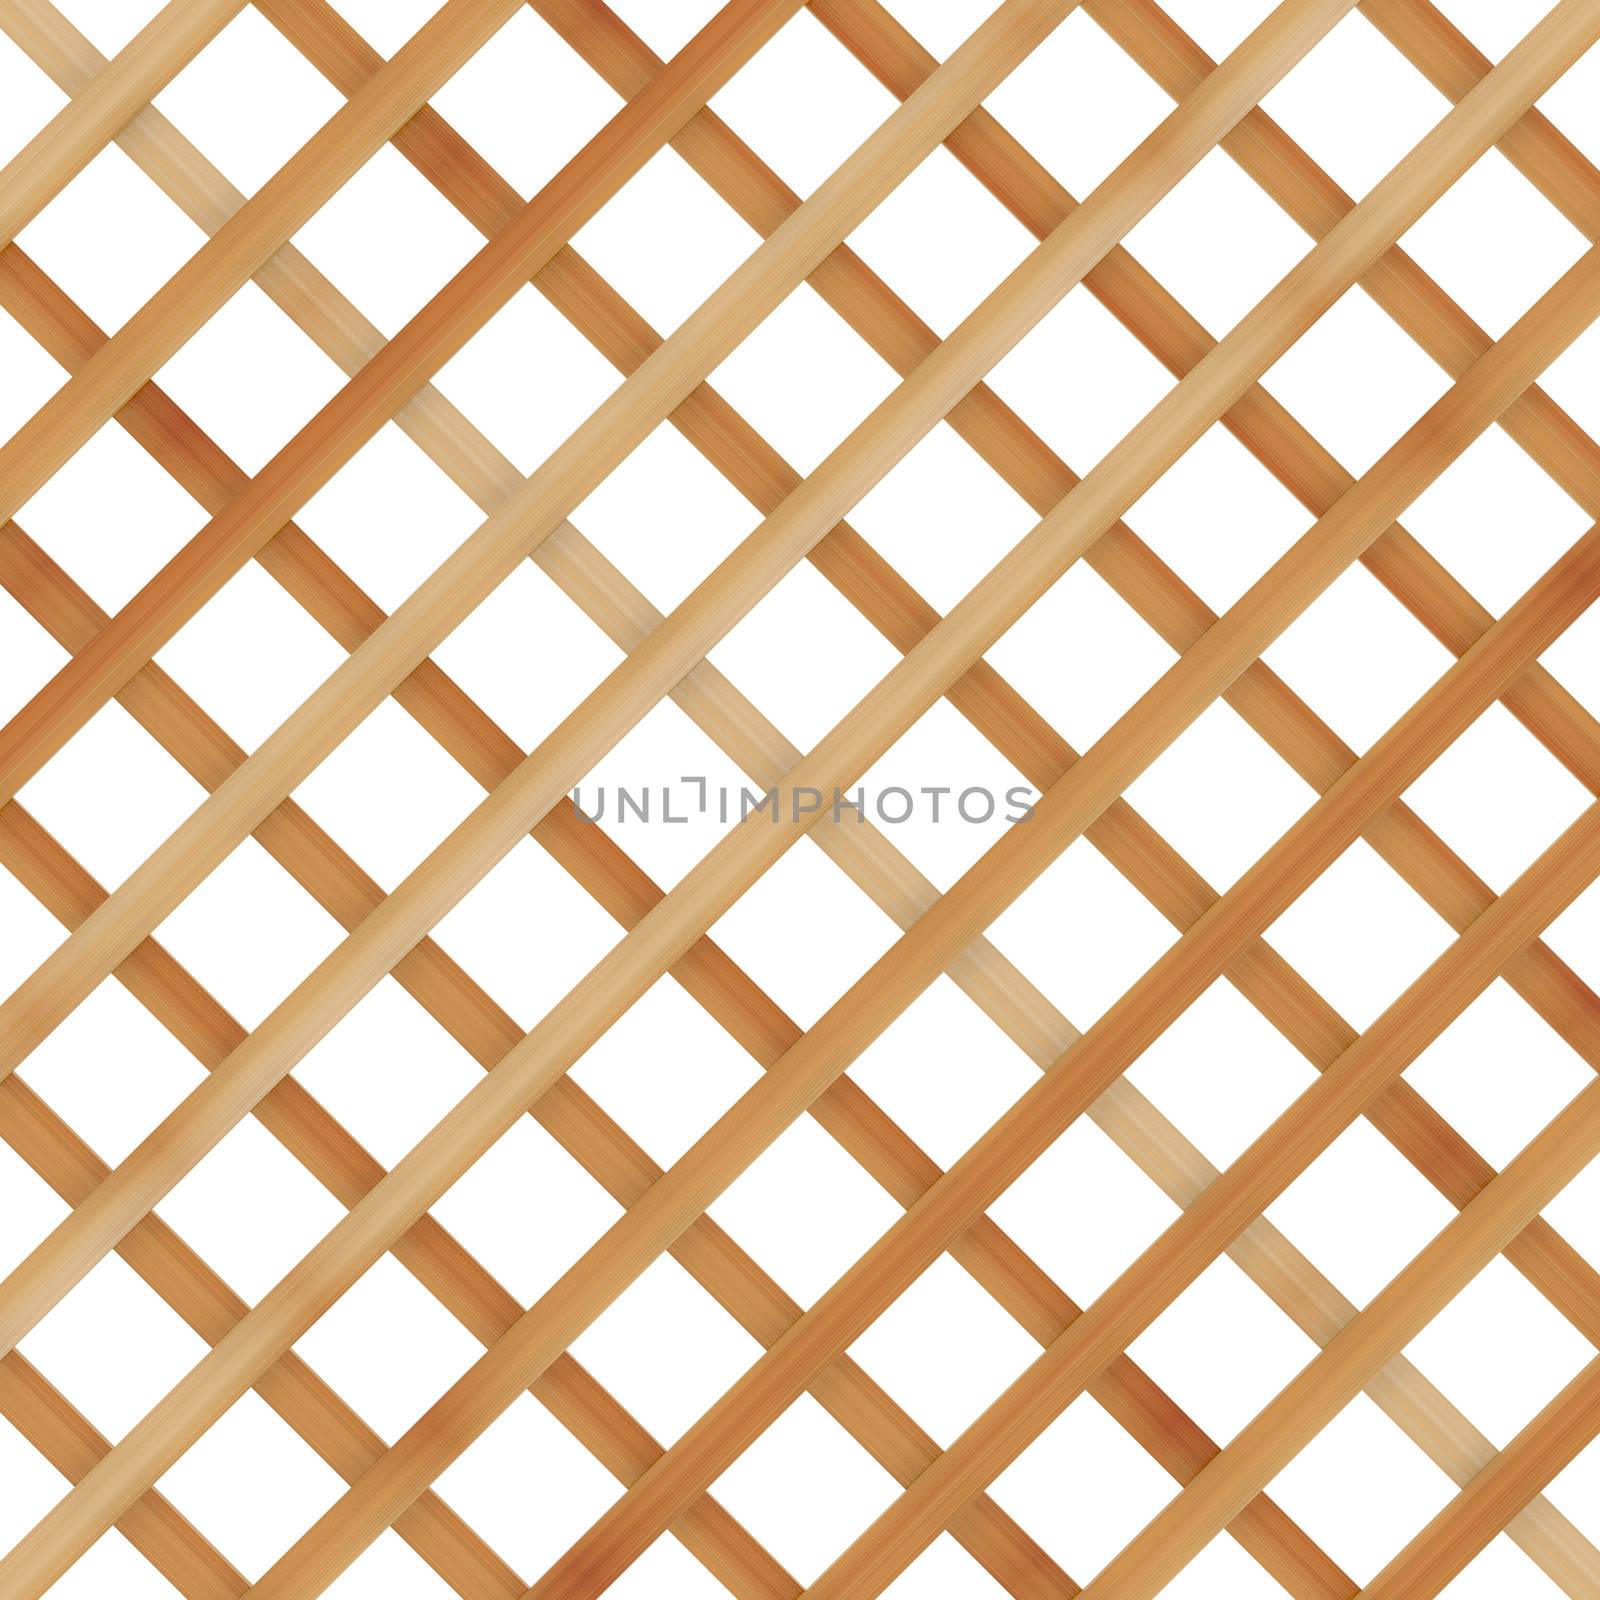 Woven rattan with natural patterns by cherezoff